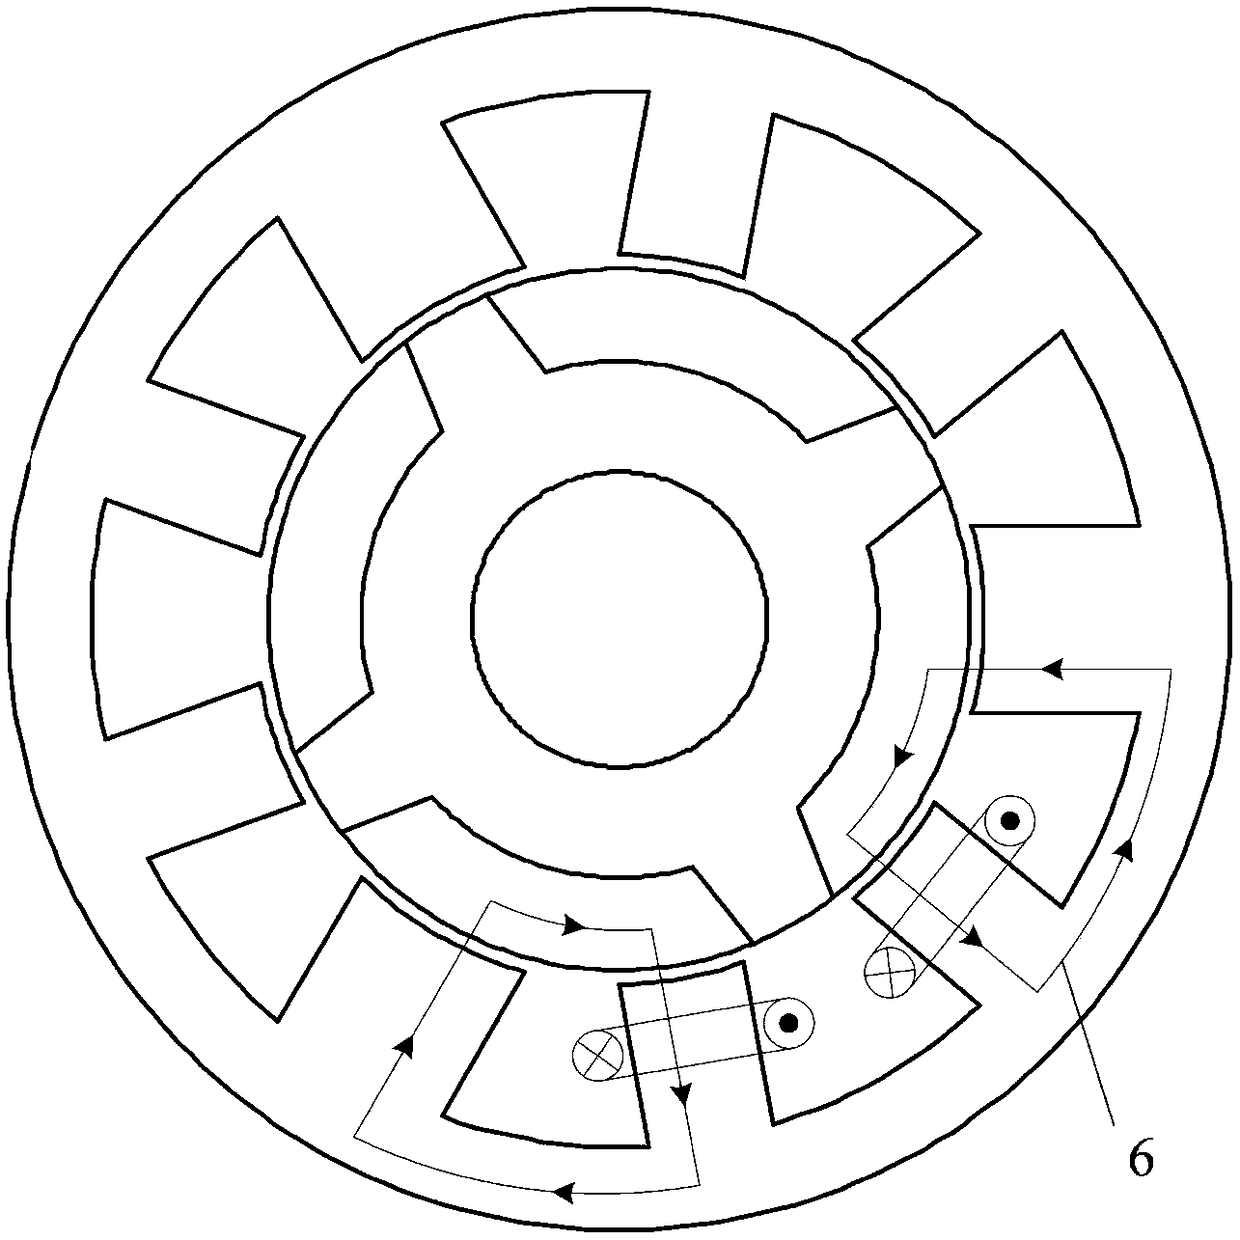 A segmented rotor switched reluctance motor